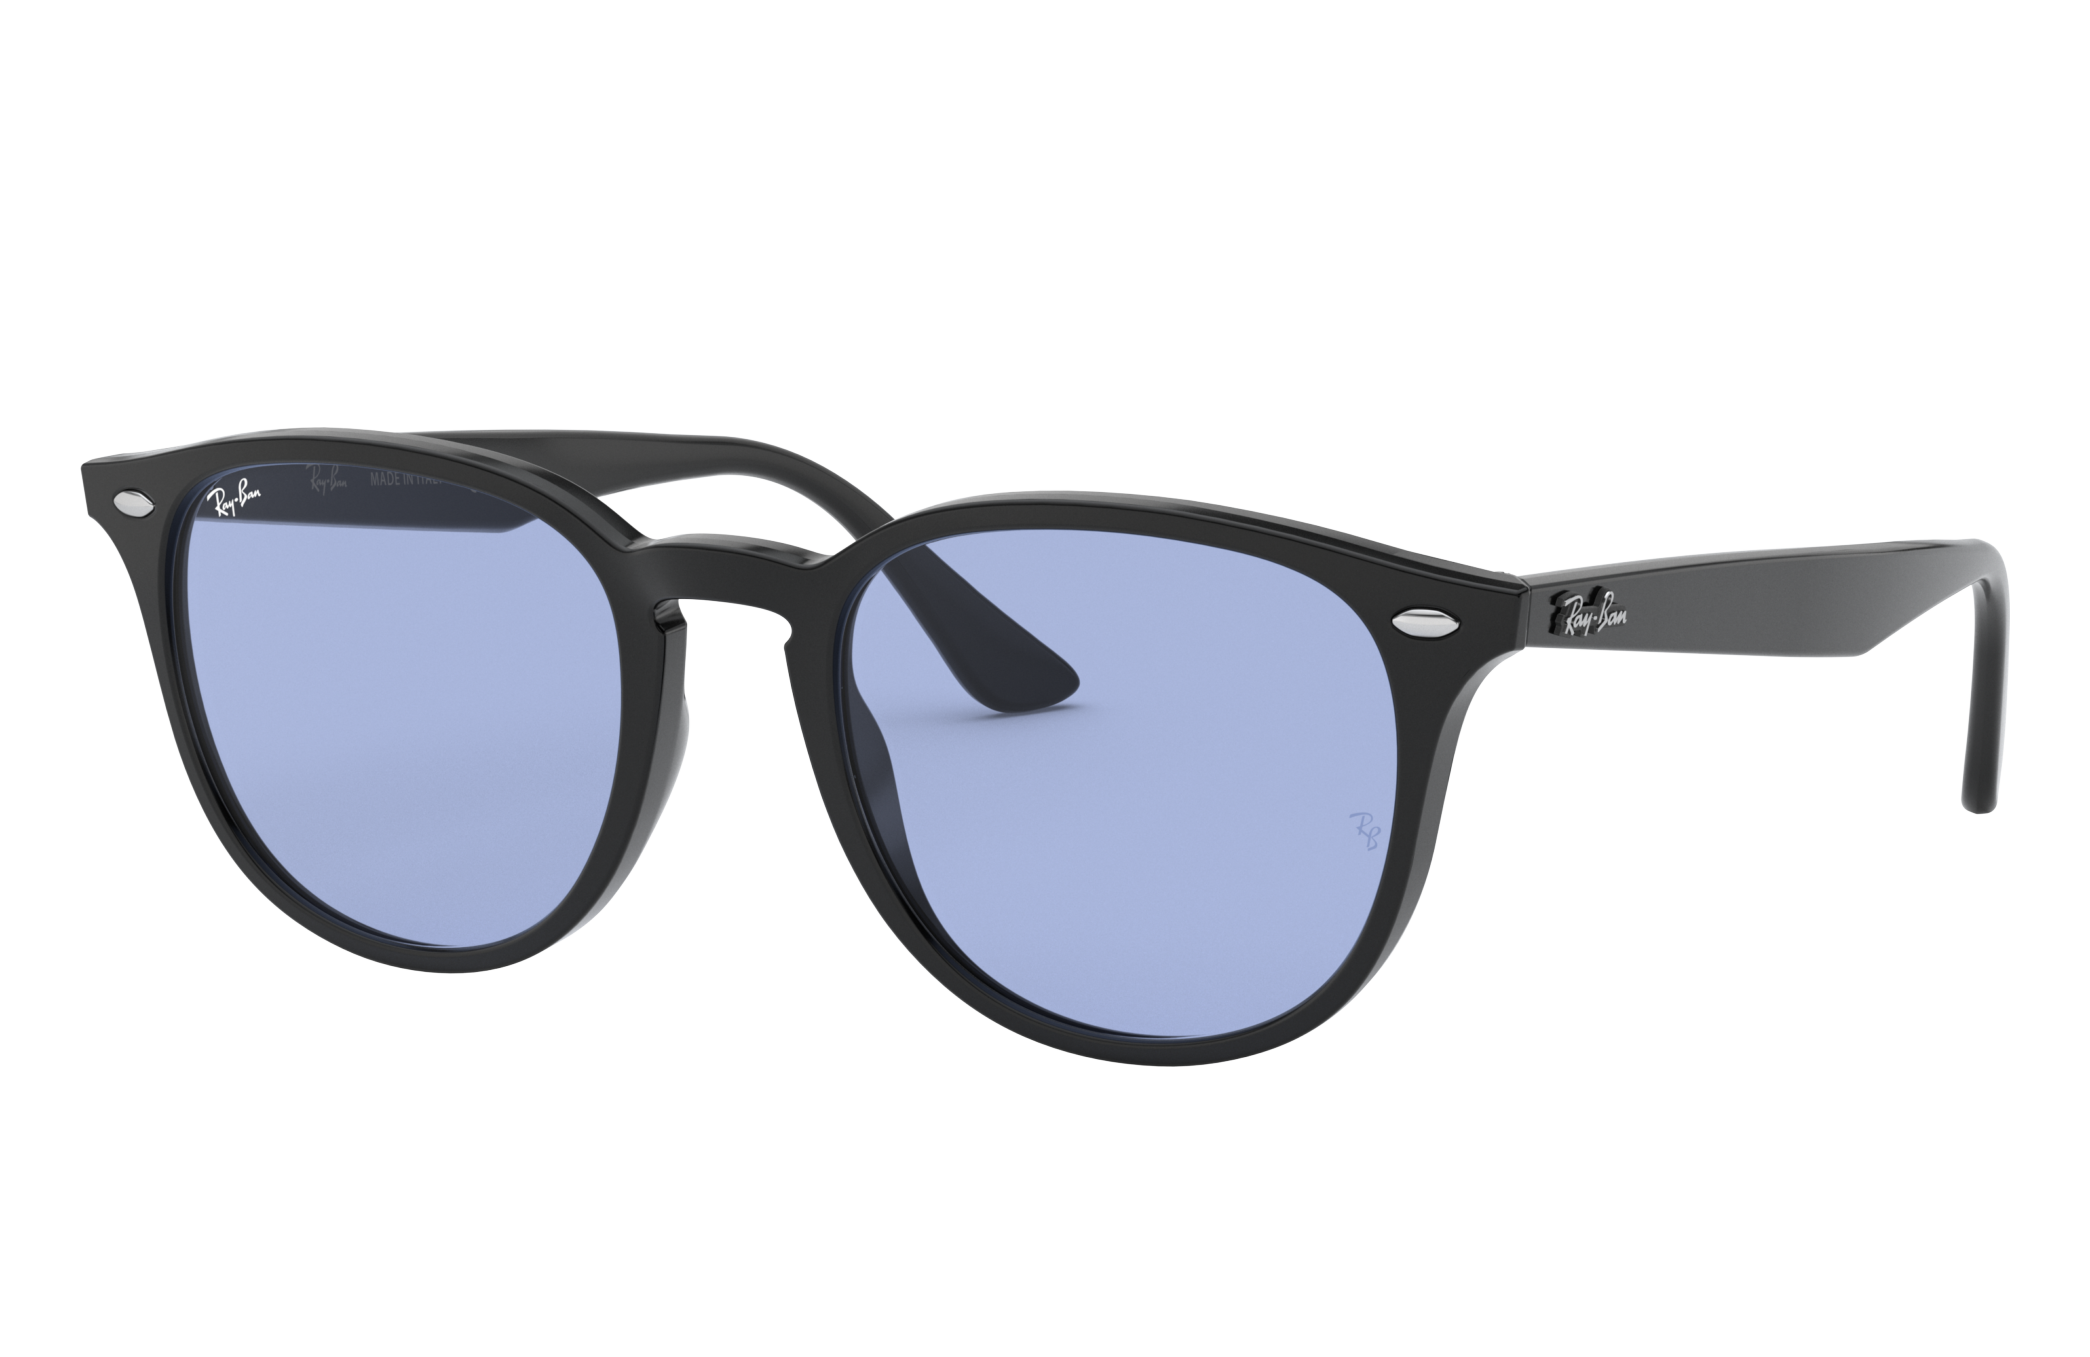 RB4259 WASHED LENSES Sunglasses in Black and Blue - RB4259F | Ray